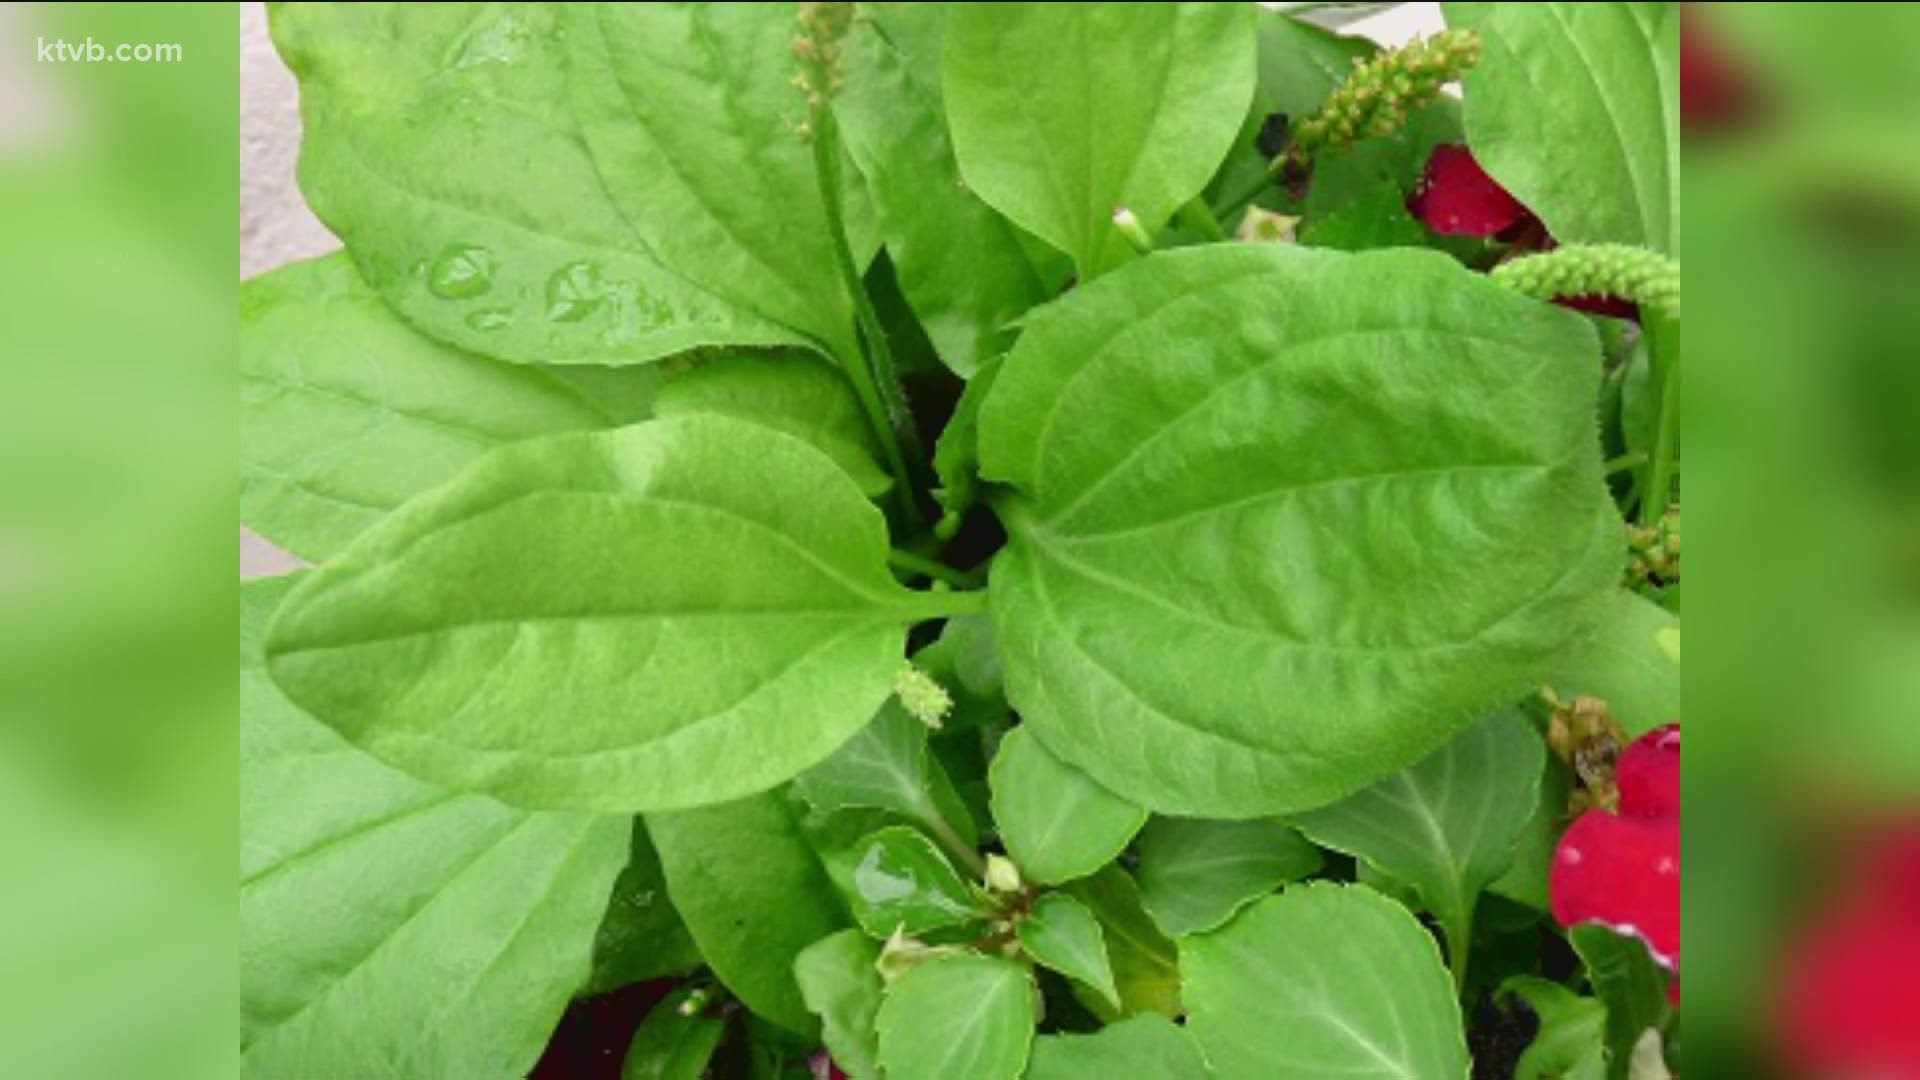 Garden master Jim Duthie show us some edible weeds that are probably growing in your yard.